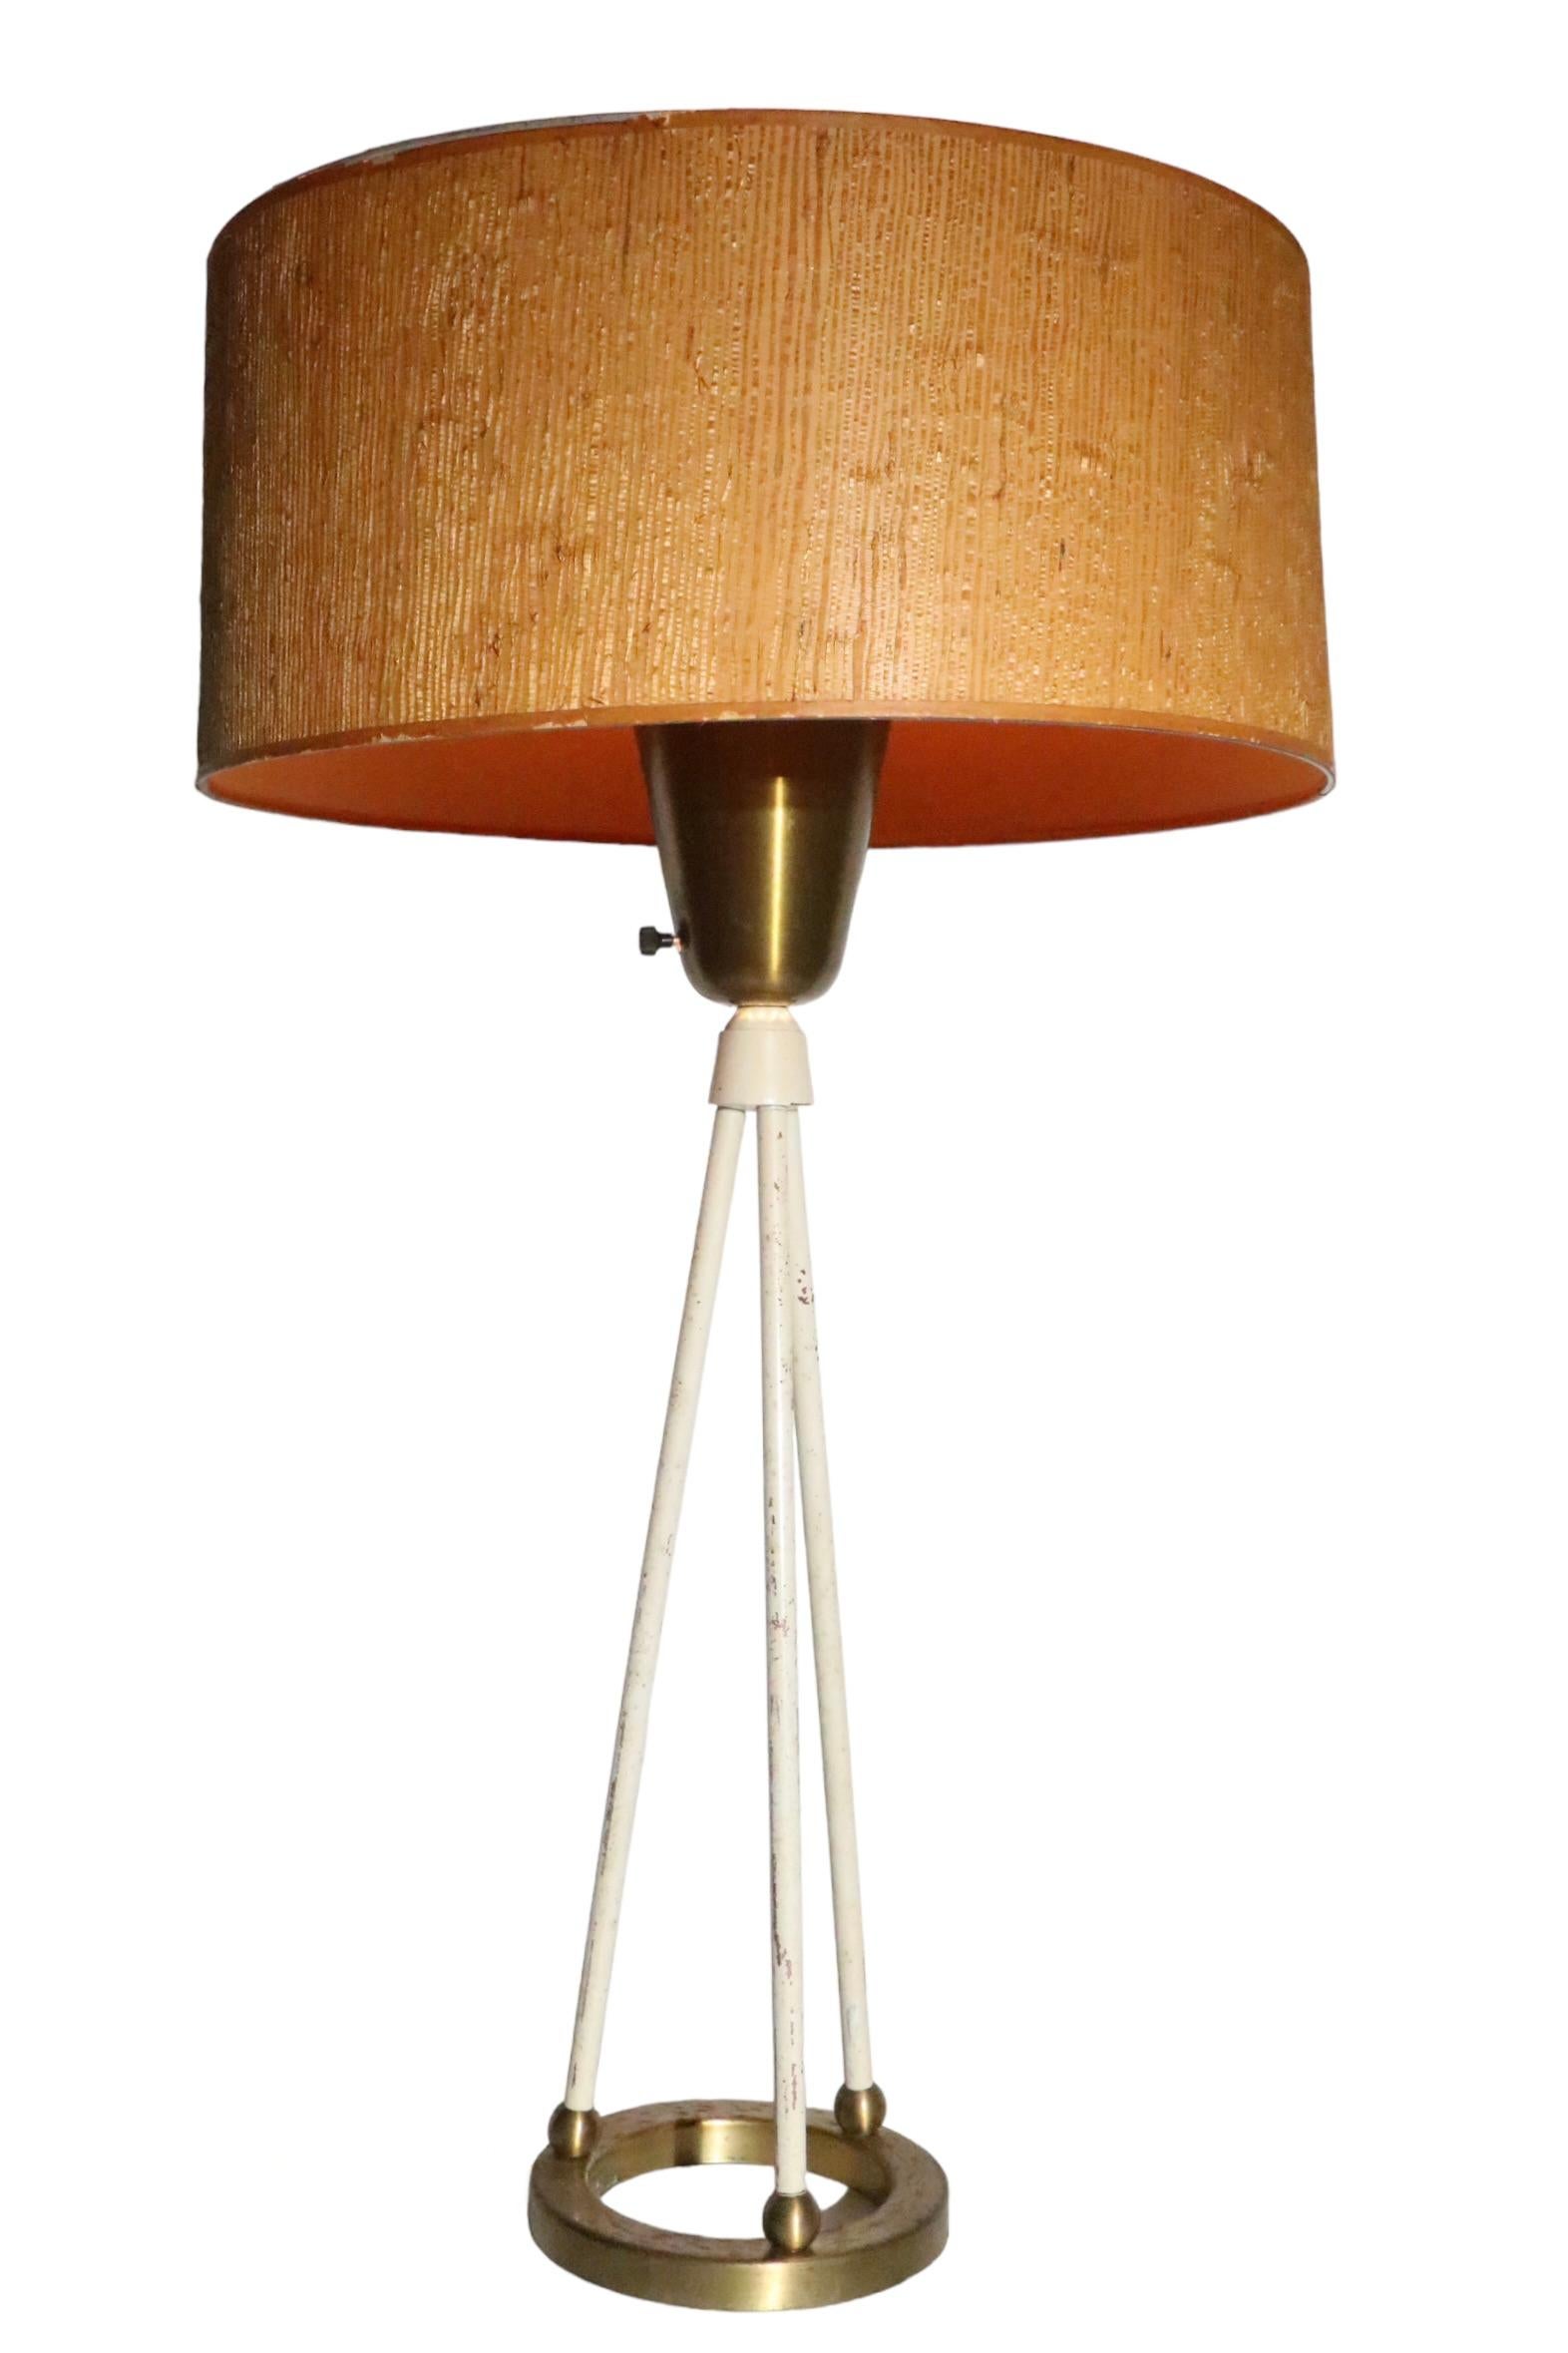 Architectural design table lamp attributed to Gerald Thurston for Lightolier circa 1950's. The lamp features a ring firm base from which extend three rods that support a brass cup at the top. The lamp is in good, original, working condition, the